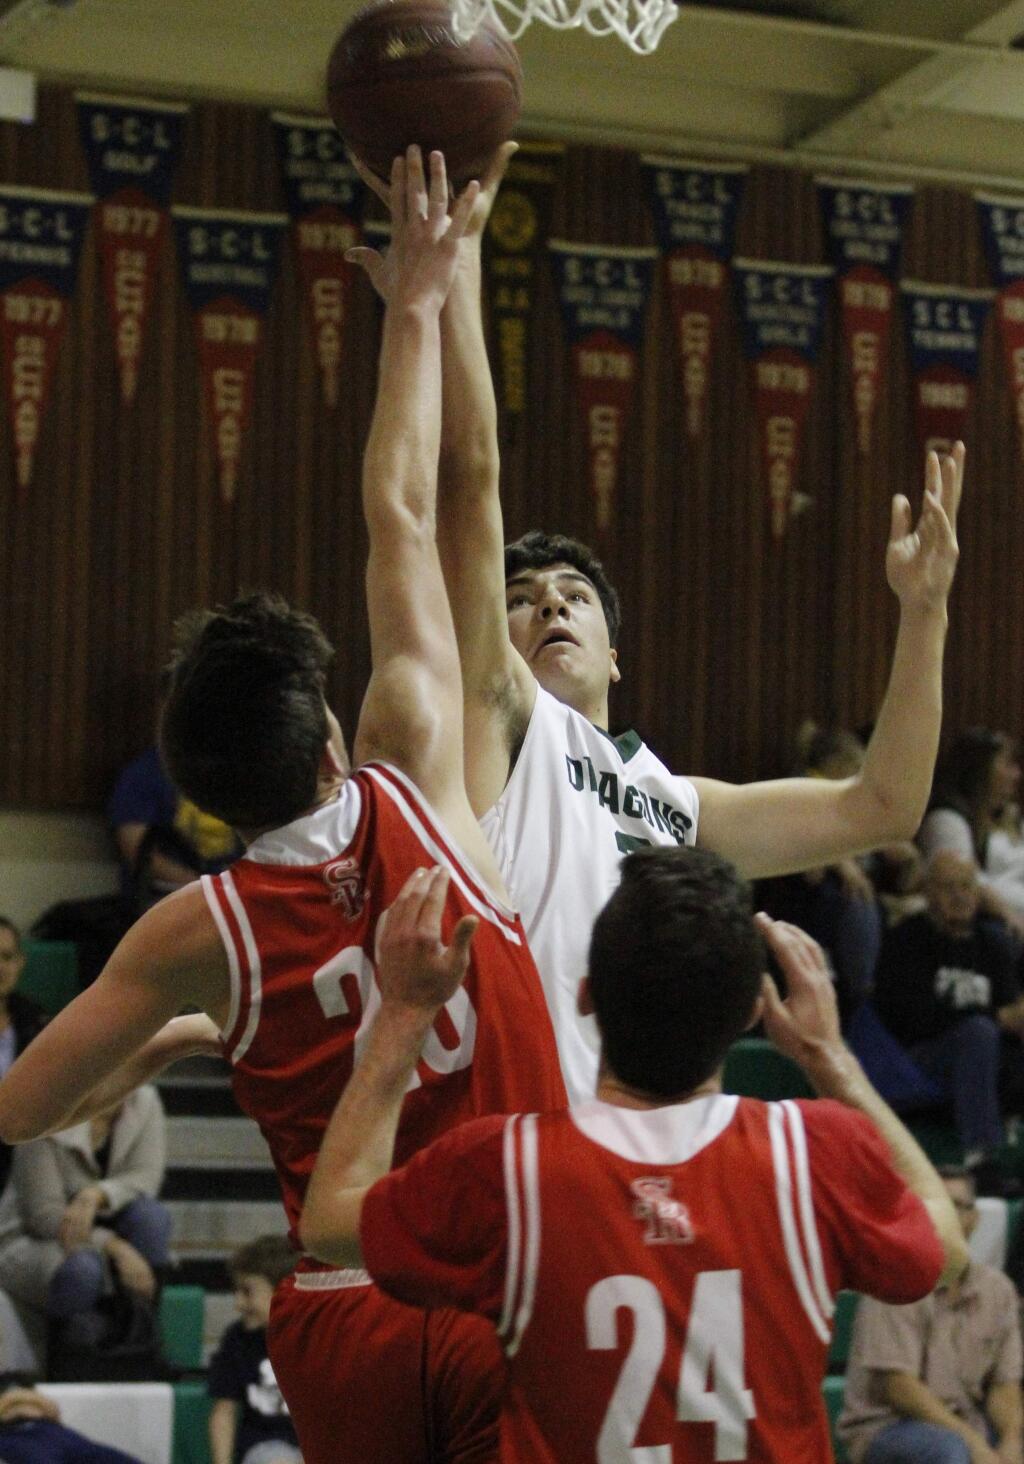 Bill Hoban/Index-TribuneSonoma's Tyler Garrett reaches for a rebound in a recent game. The Dragons Wednesday won their first-round game in the Dixon Ram Jam Winter Classic and advanced to the semi-finals on Thursday.